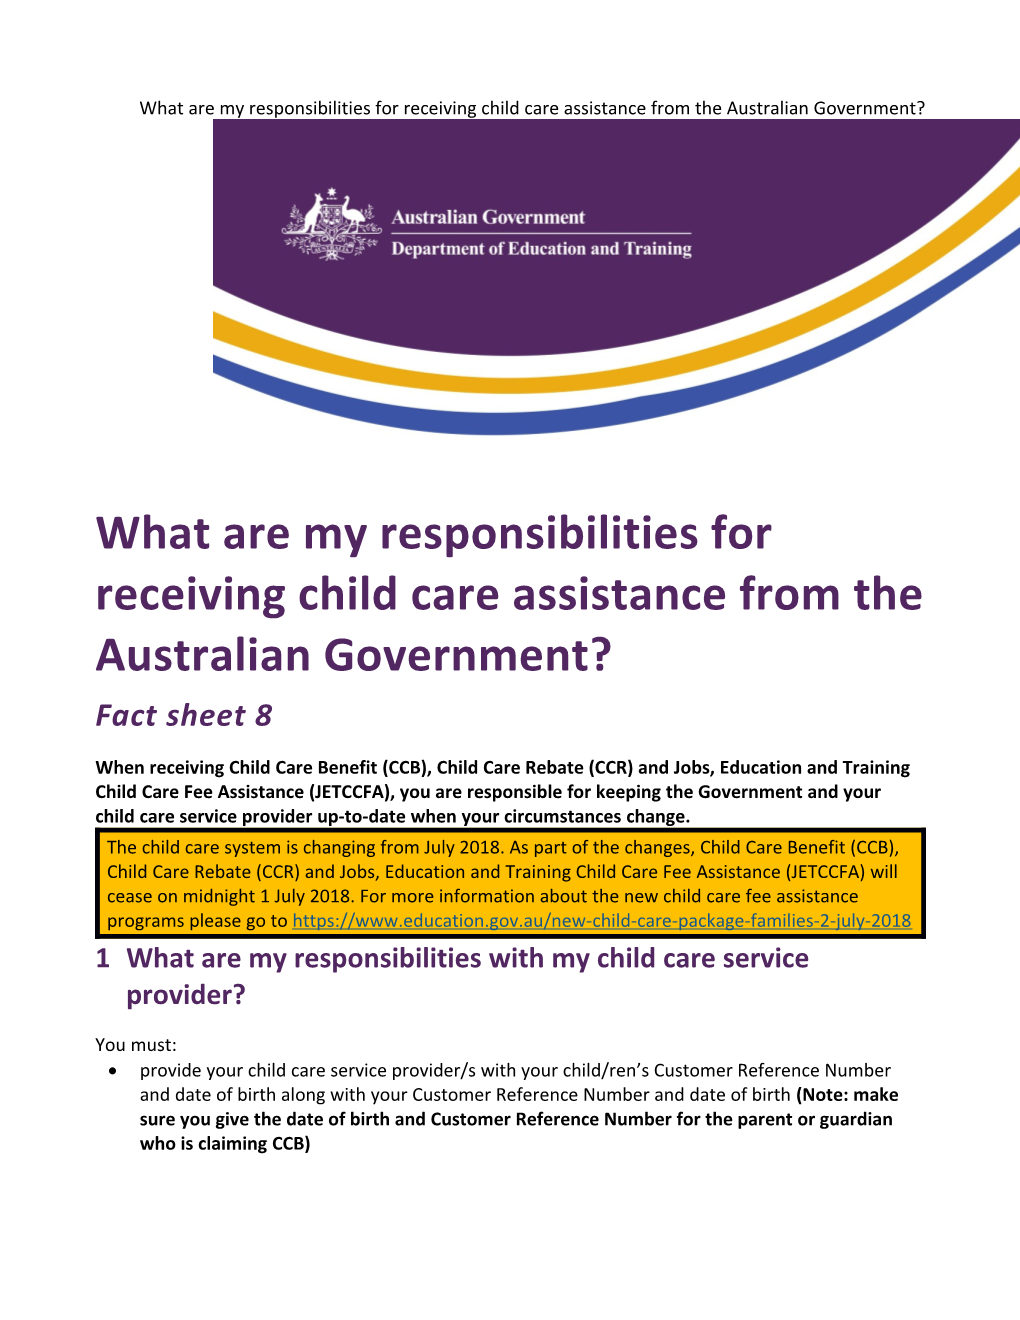 What Are My Responsibilities for Receiving Child Care Assistance from the Australian Government?